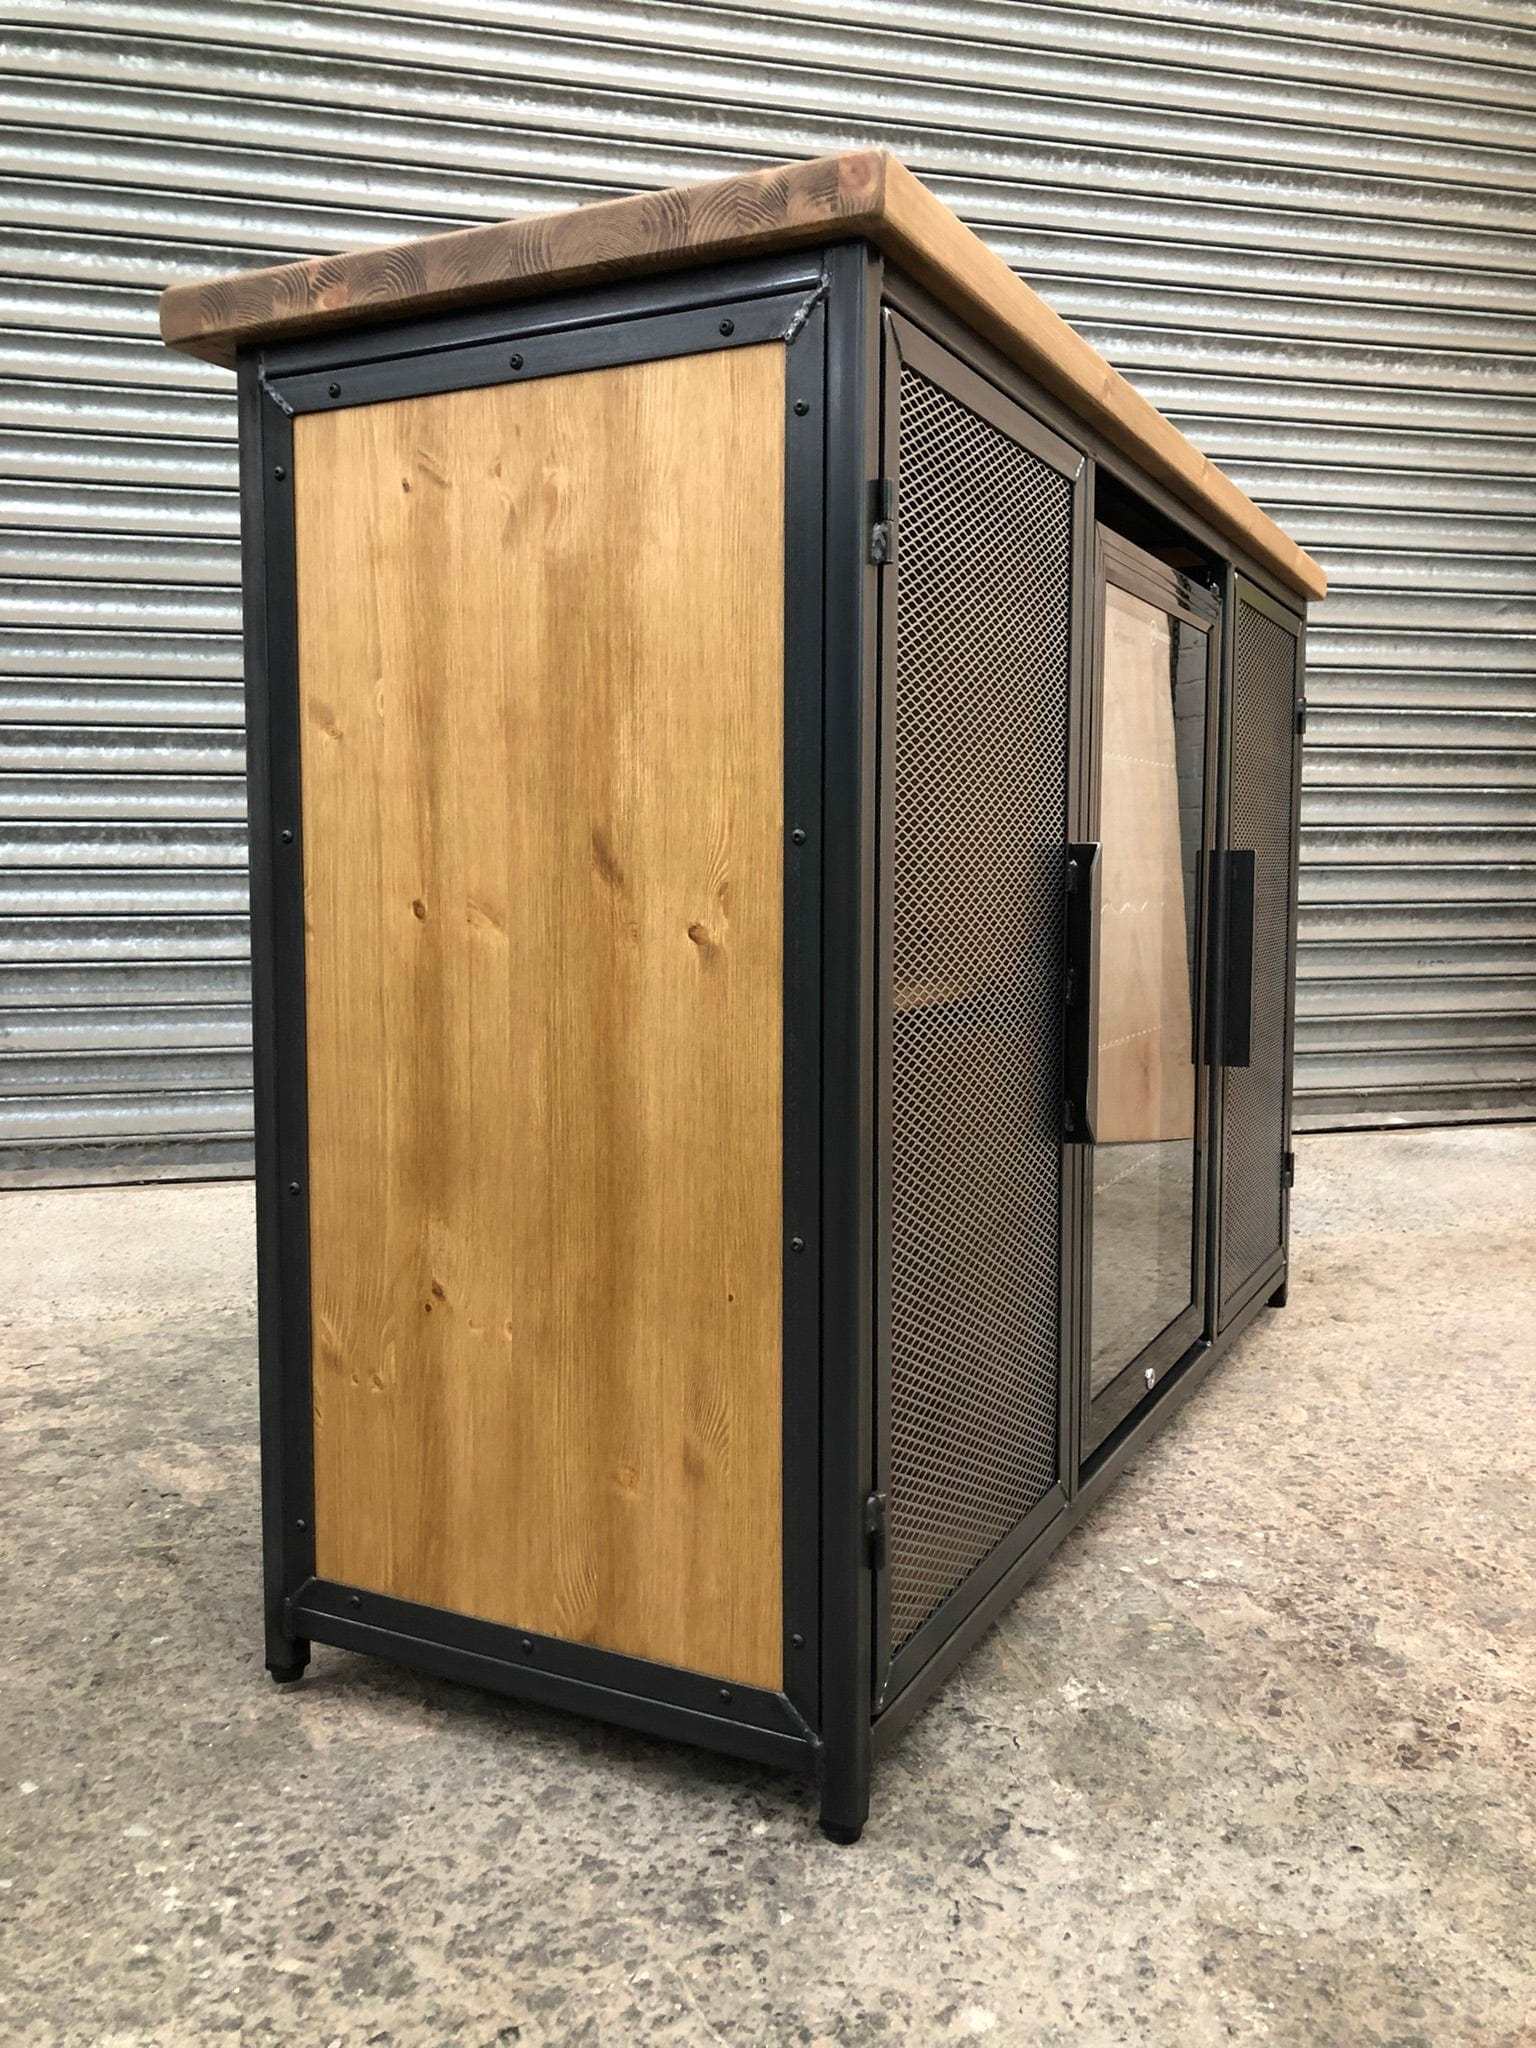 Wooden Metal Drinks Cabinet with Fridge  RSD Furniture   